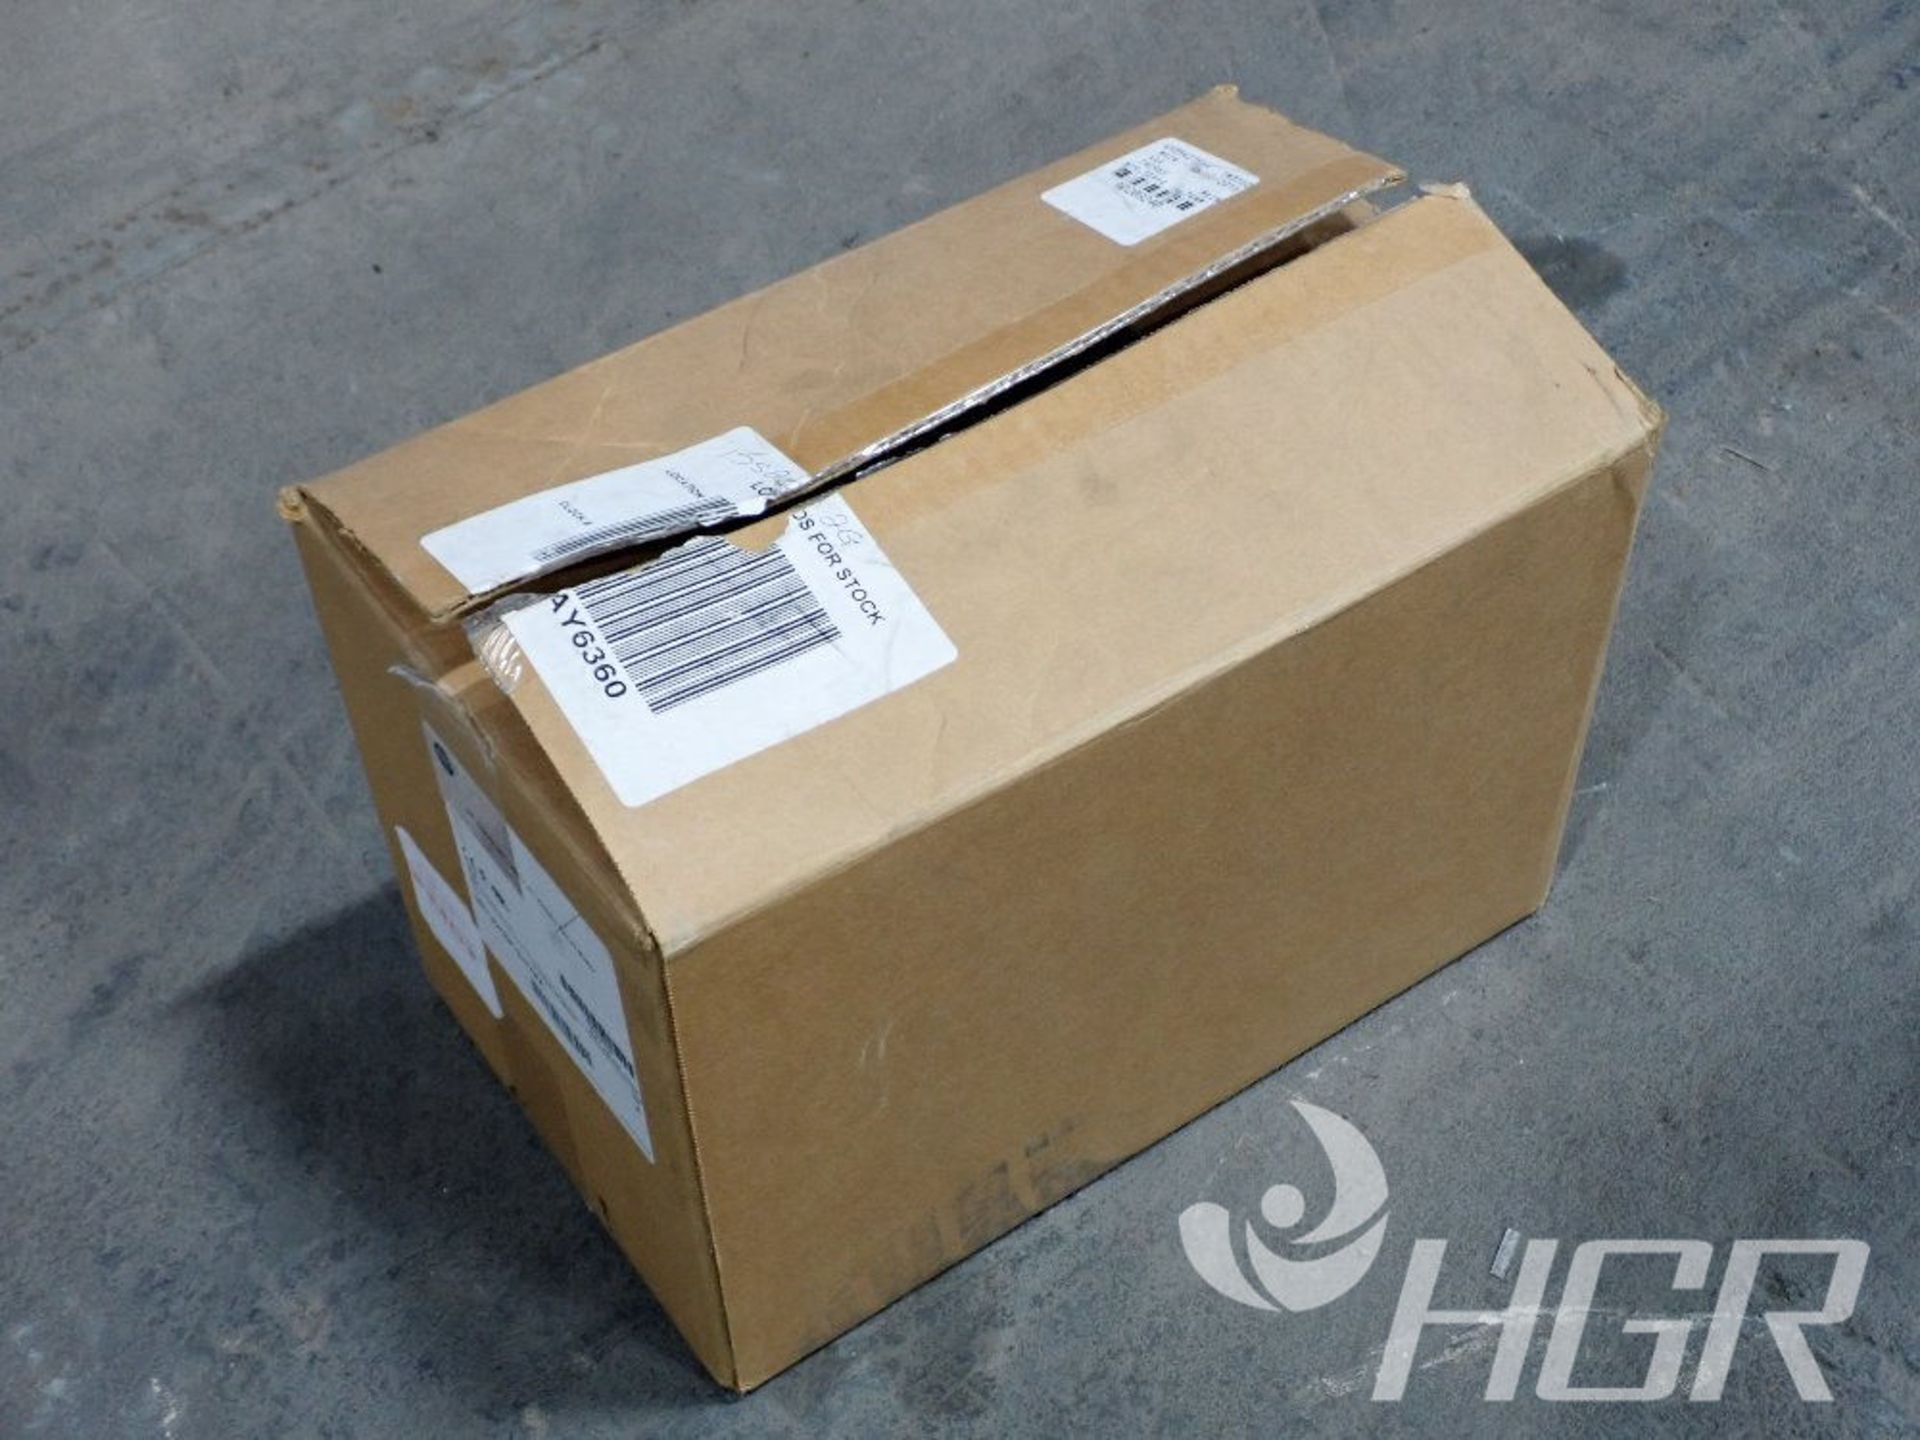 AB SERVO MOTOR, Model MPL-B420P-SJ74AA, Date: n/a; s/n n/a, Approx. Capacity: 2.5HP, Power: 3/60/ - Image 8 of 8